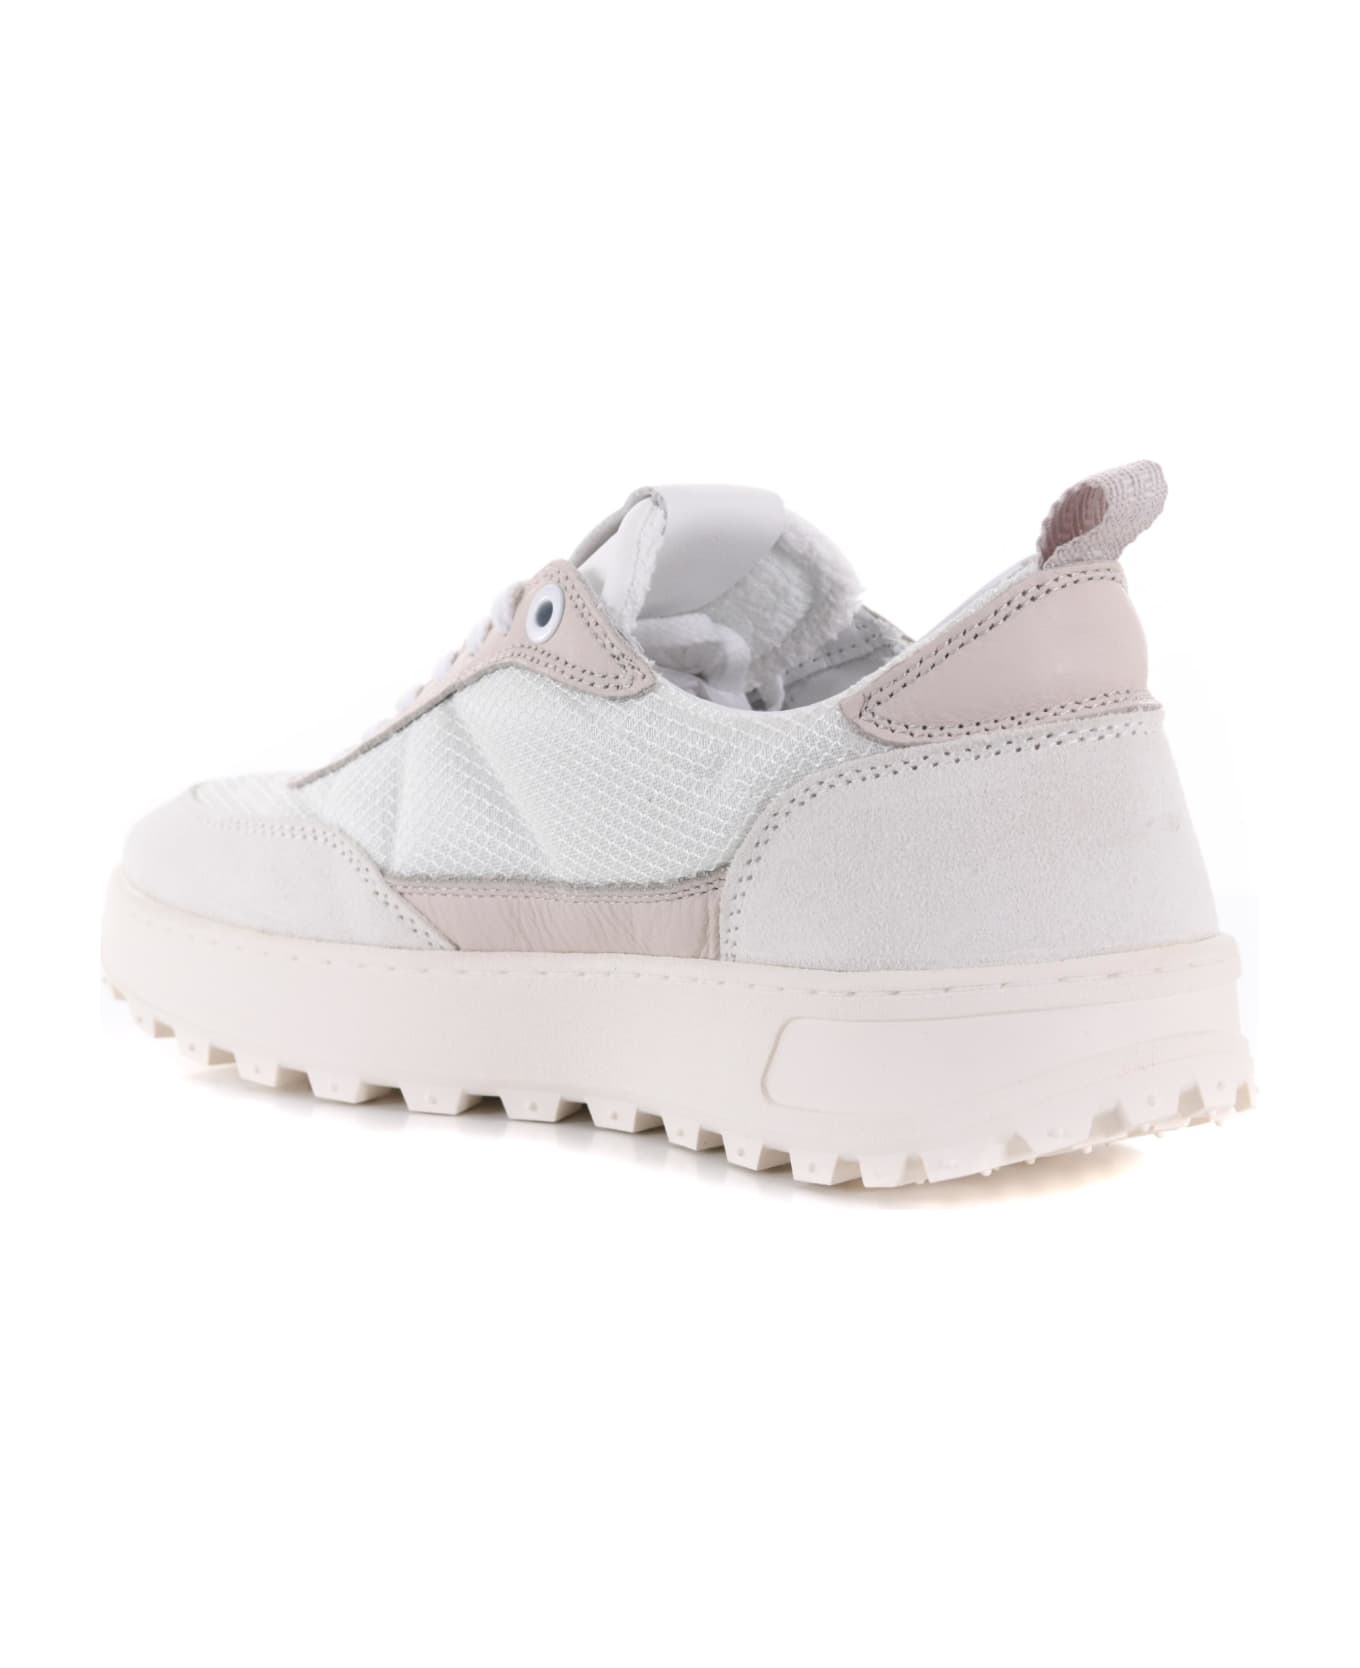 D.A.T.E. Sneakers "kdue Hybrid" In Leather And Nylon - Ghiaccio/bianco